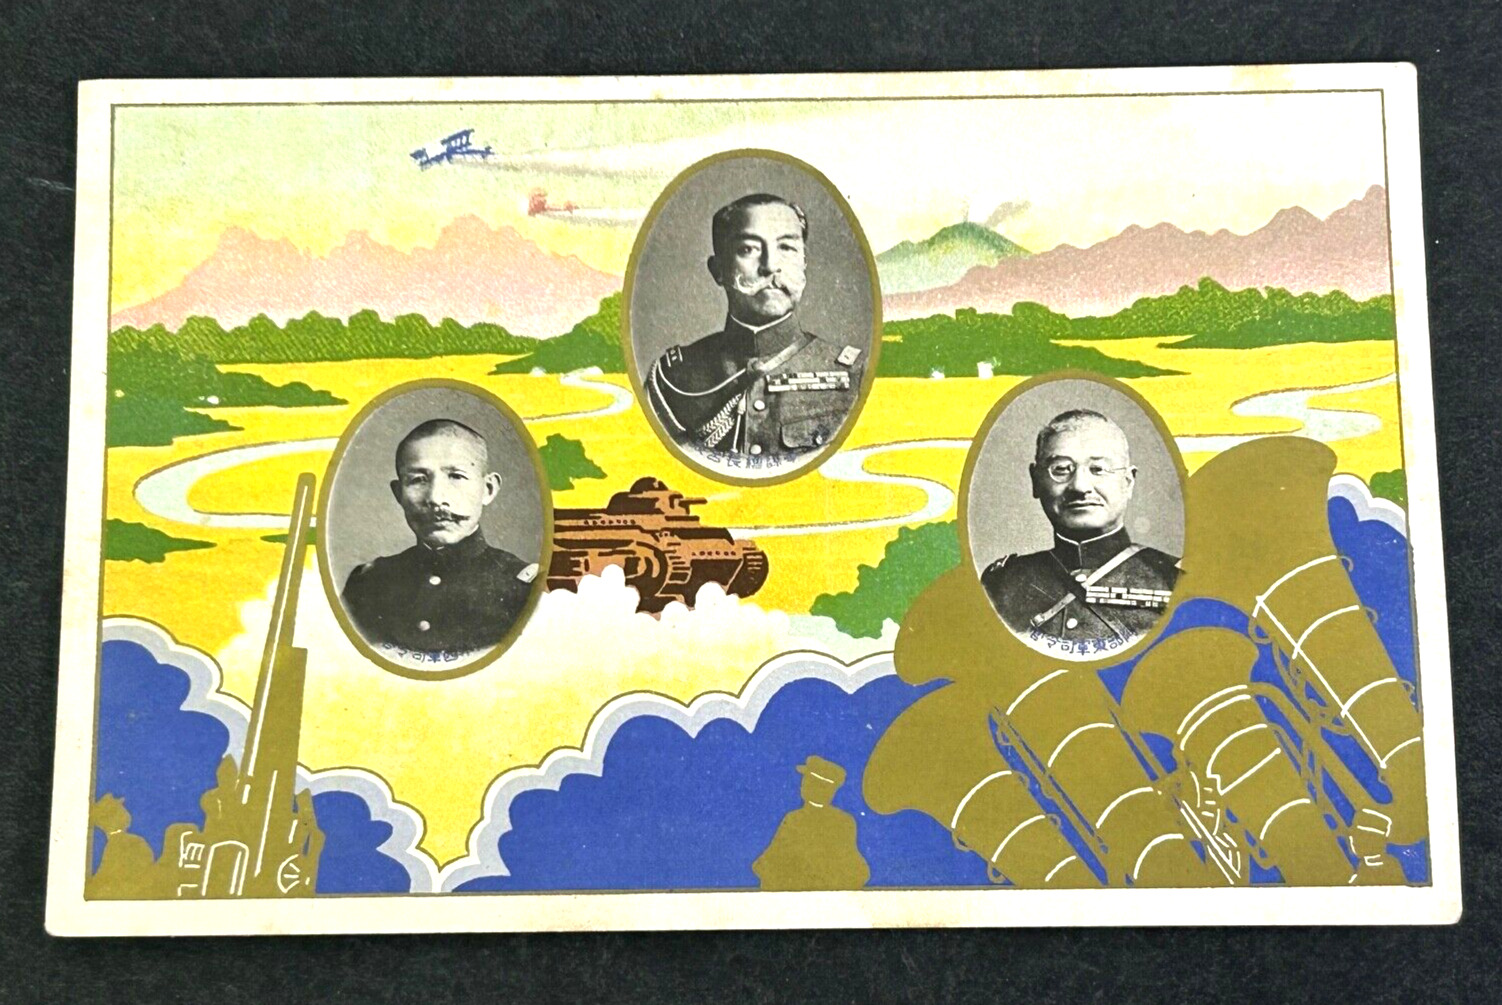 1934 Japanese Army Grand Exercise Postcard